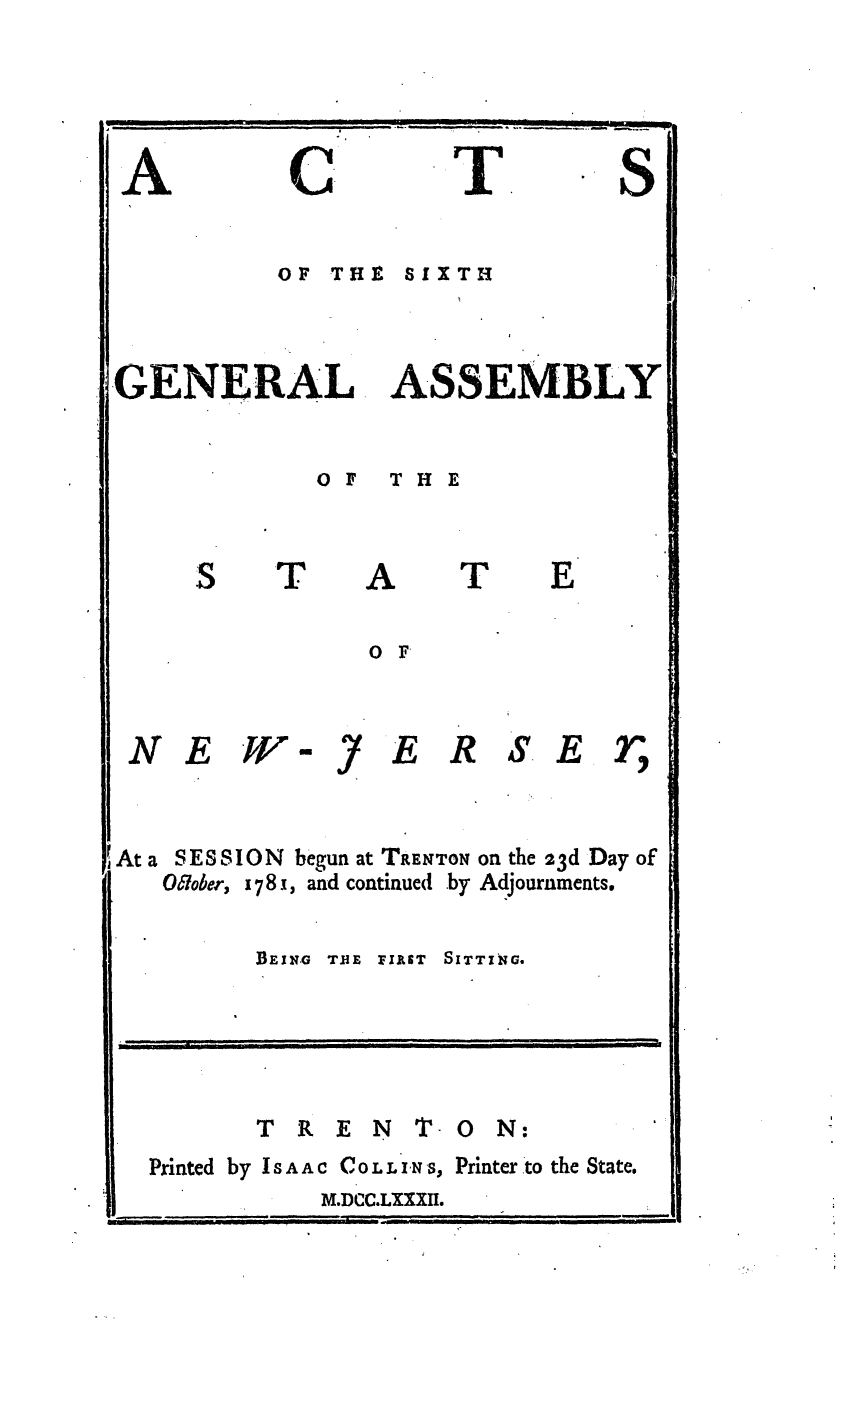 handle is hein.ssl/ssnj0234 and id is 1 raw text is: c

OF THE SIXTH

GENERAL

T

ASSEMBLY

OF  THE
A T
O F

N E W-m Y

E R

S.E r

At a SESSION begun at TRENTON on the 23d Day of
O&ober, 178 j, and continued by Adjournments.
BE1NG T.HE FIRST SITTING-

T R E N

T- 0 N:

Printed by Is A AC Co L L IN s, Printer to the State.
M.DCC.LXXXIH.

A

T

S

E

.... . ...   --  .....               ..     '  '  ''    I

..      .   .. . . .       i   i          Ill     .                .l                    '
]i         i     I   i   If


